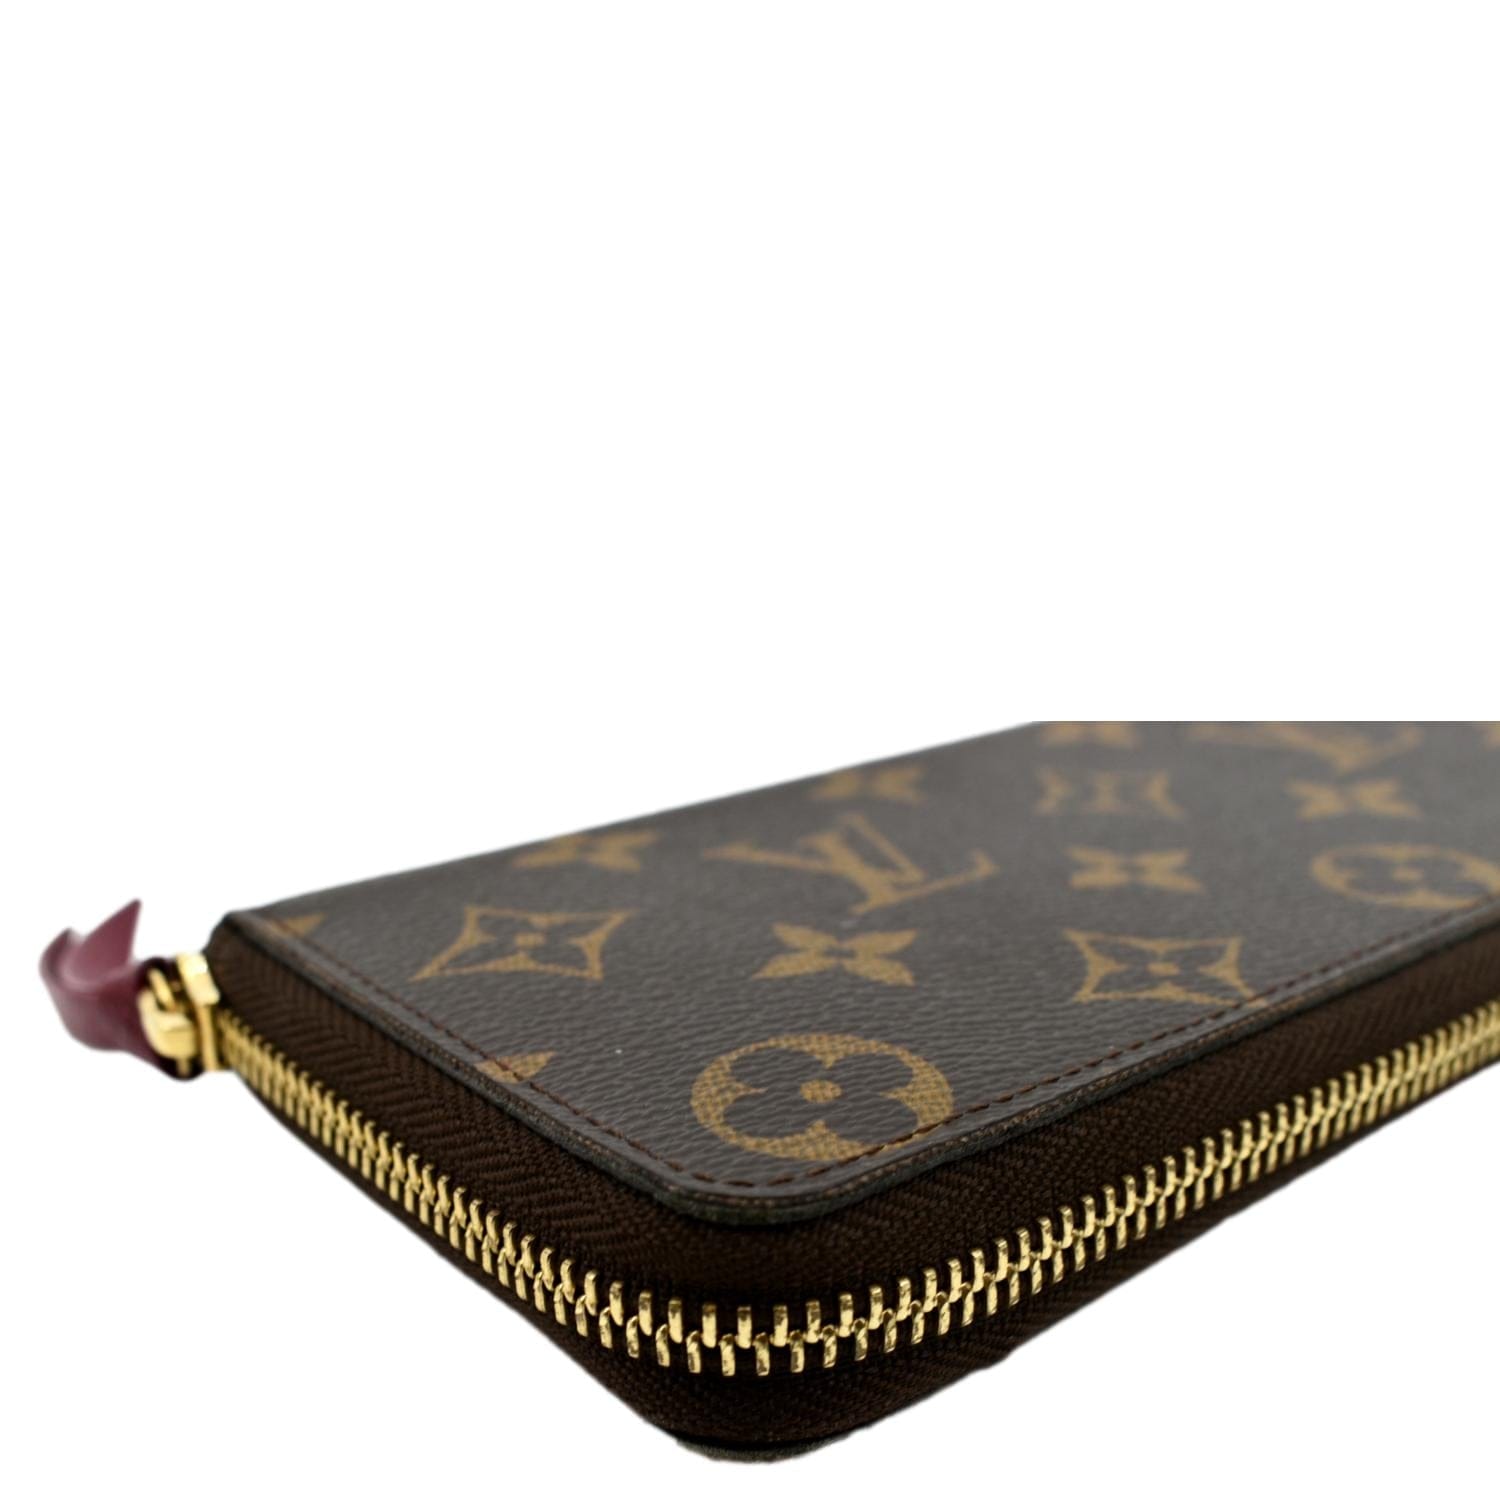 Clemence Wallet in Monogram, Colored Leather Zip